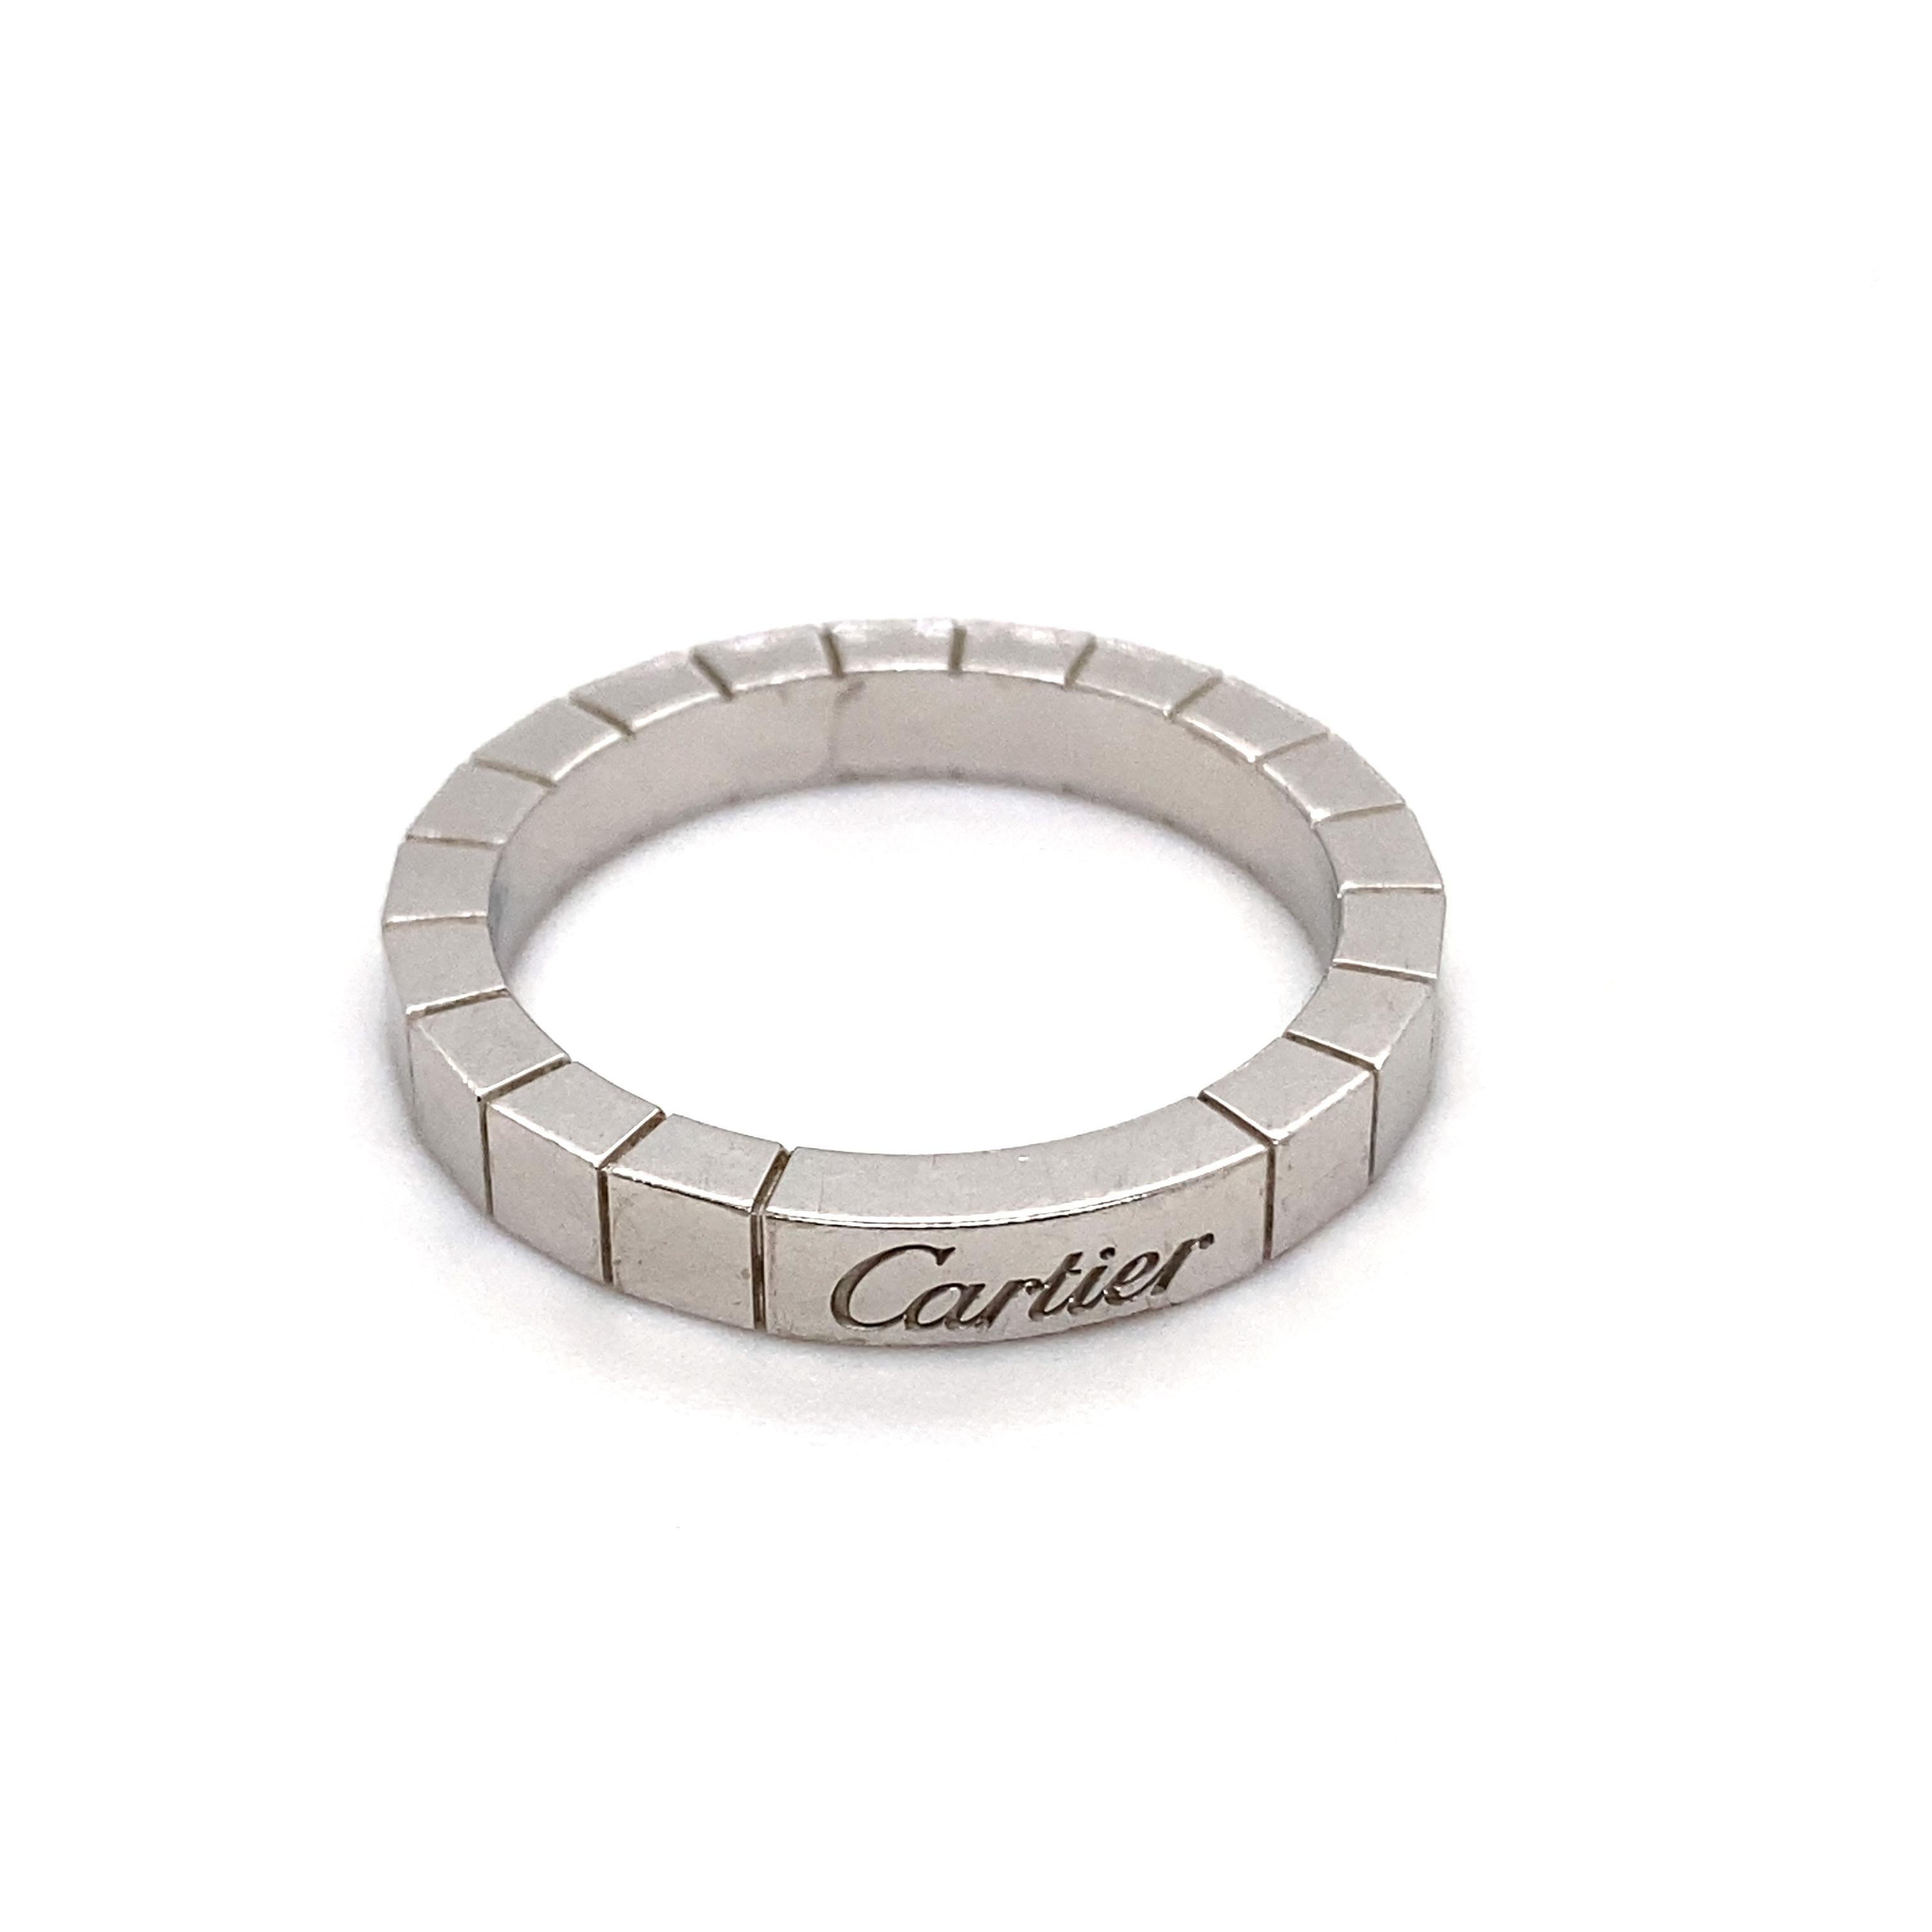 A vintage Cartier Lanières brick link band ring in 18 karat white gold, circa 2000.

The ring is comprised of Cartier's distinctive Lanières brick link design in 18 karat white gold.

The iconic Cartier signature is featured to the opposite side of